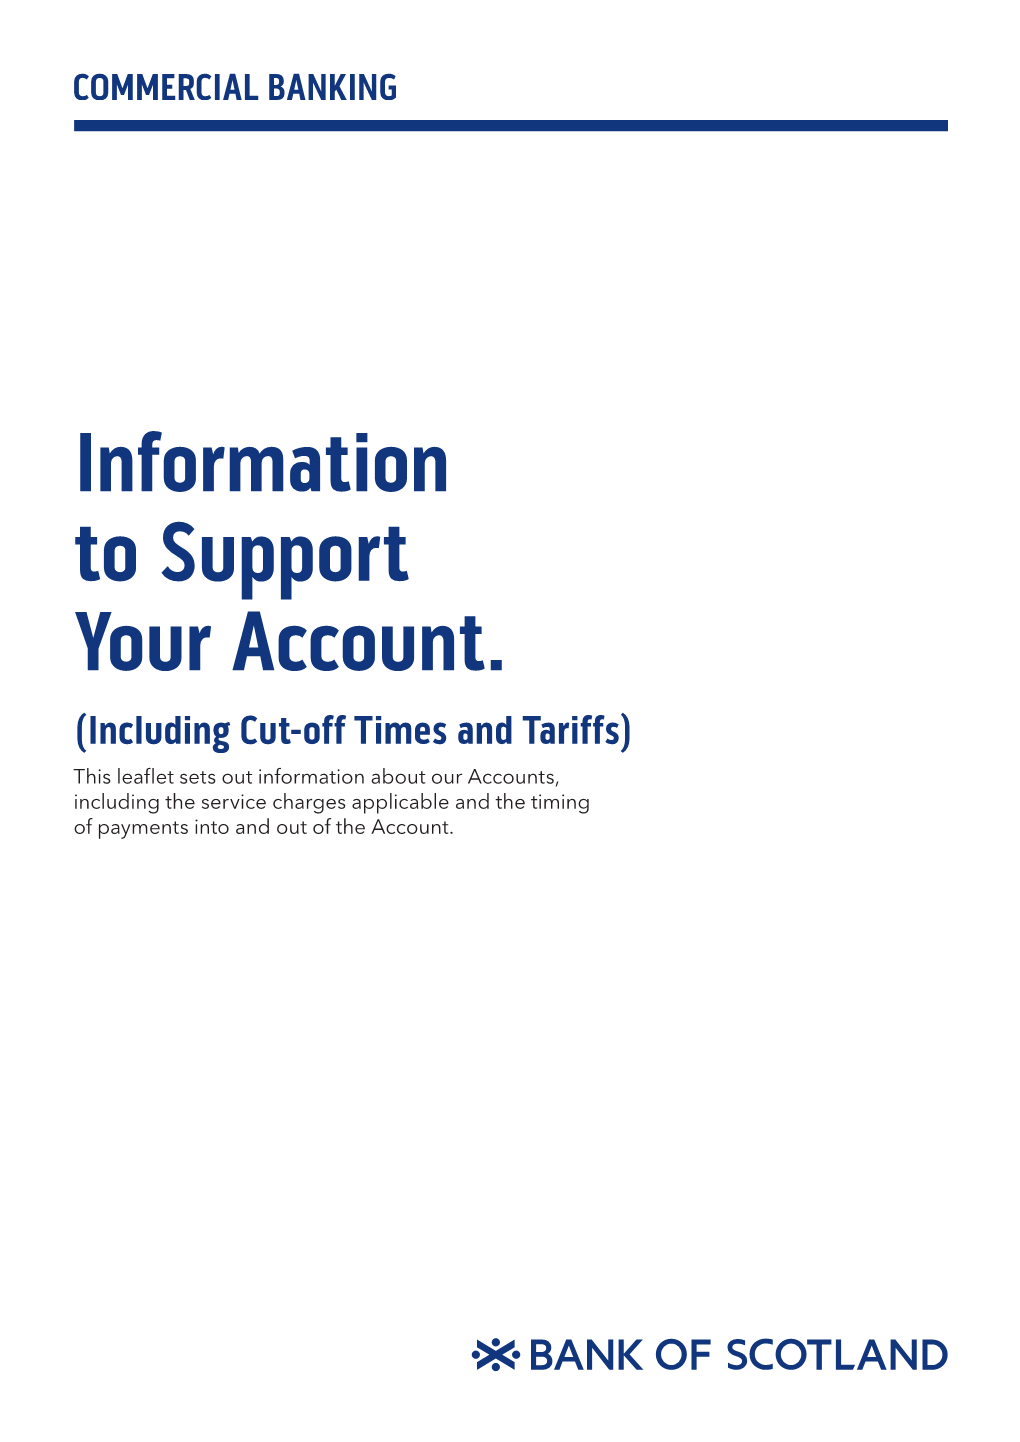 Information to Support Your Account